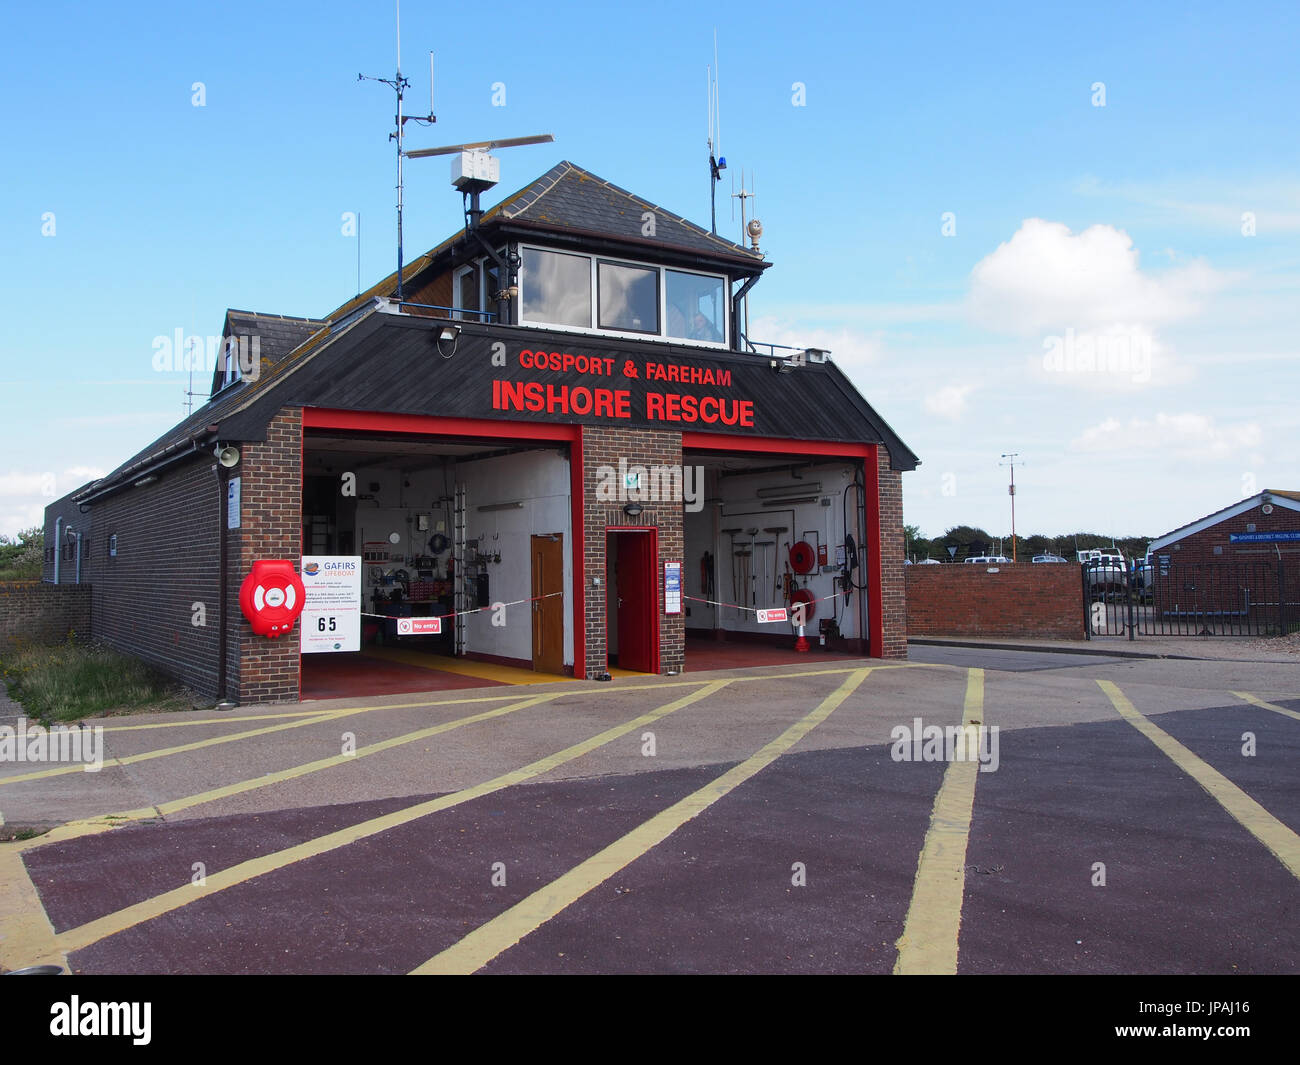 Gosport And Fareham Inshore Rescue Service (GAFIRS) lifeboat station, Stock Photo